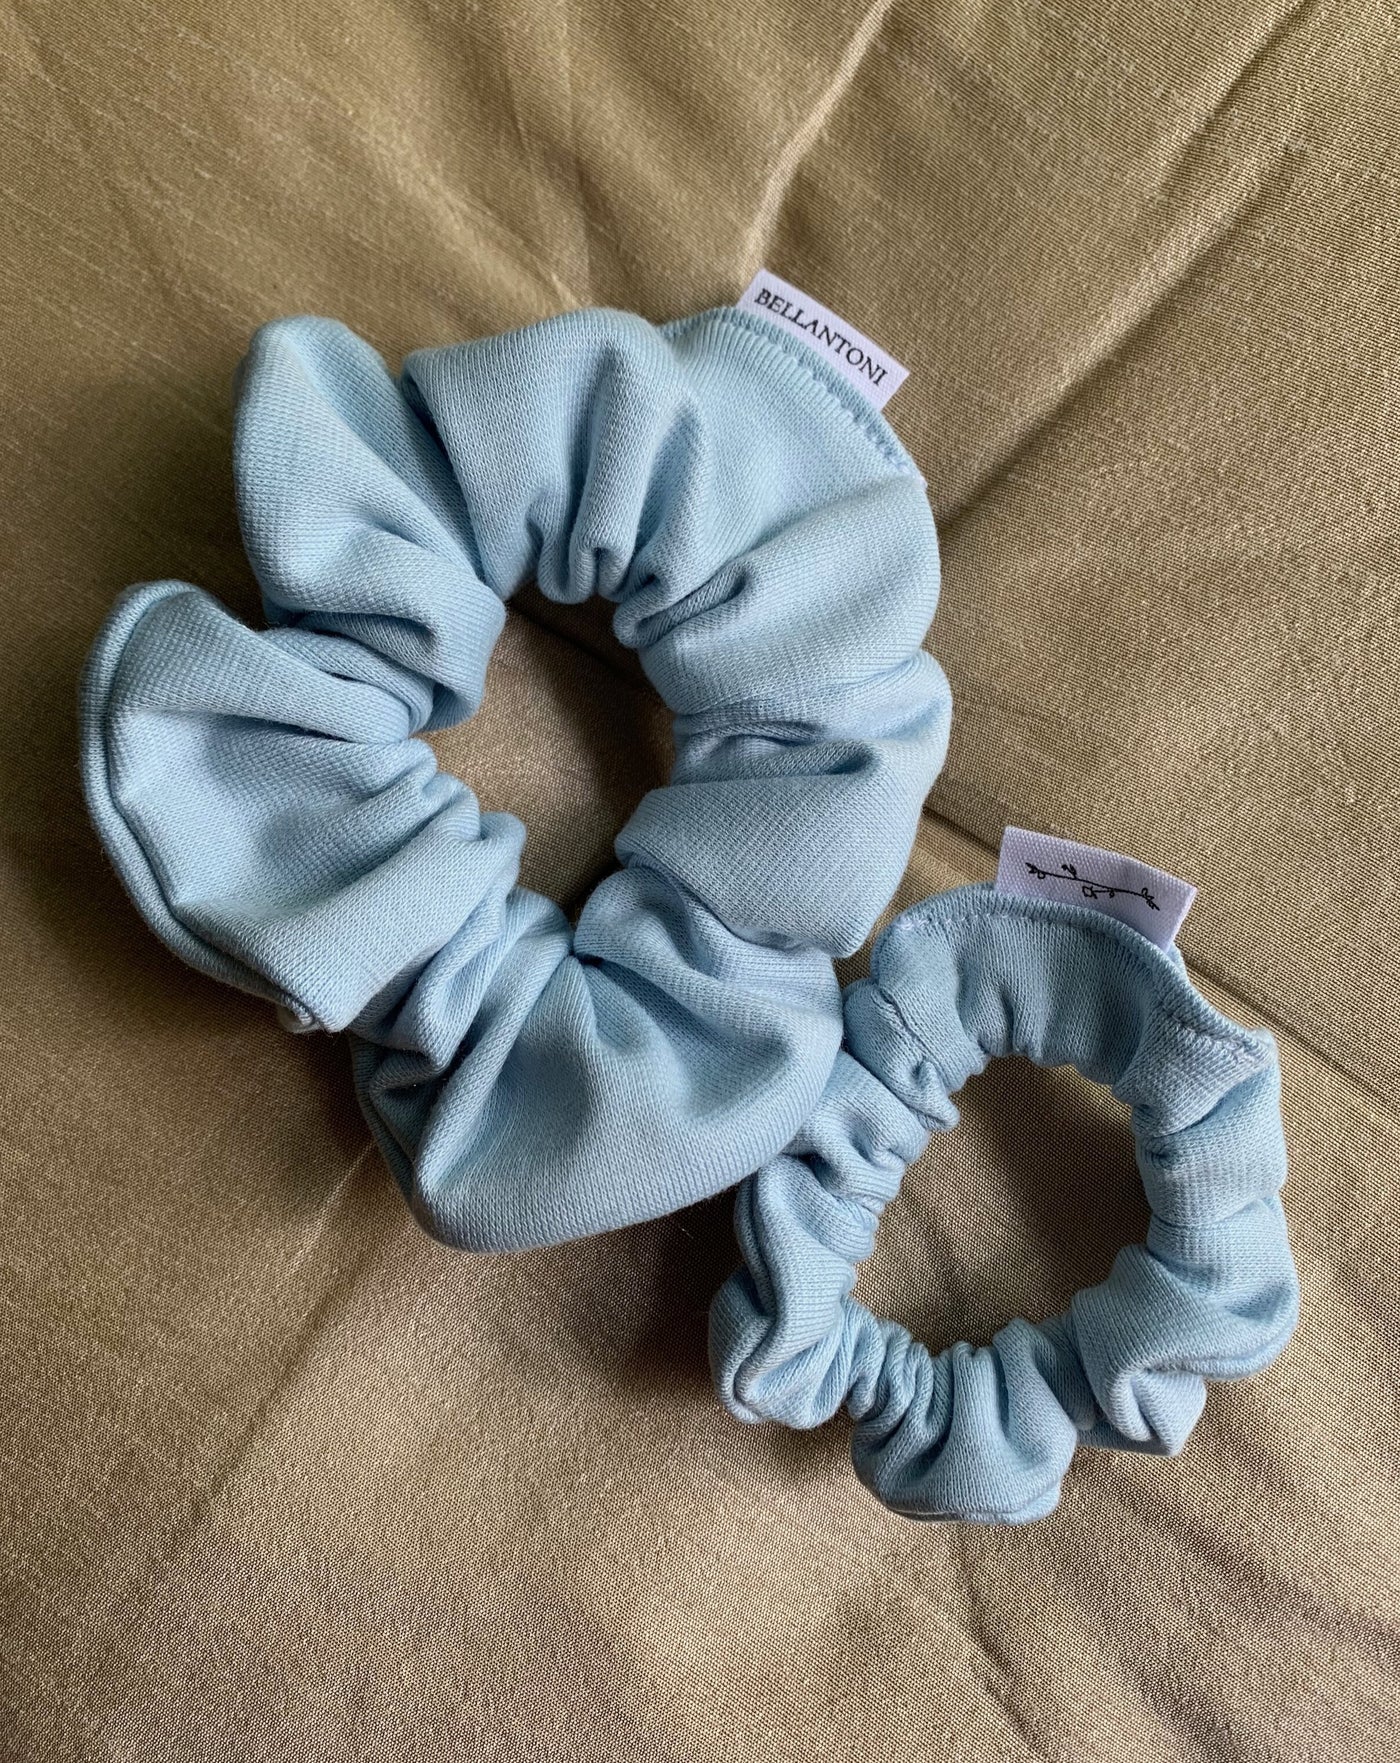 Sustainable bamboo knit Mommy and Me scrunchie set, handmade in Vancouver, Canada.